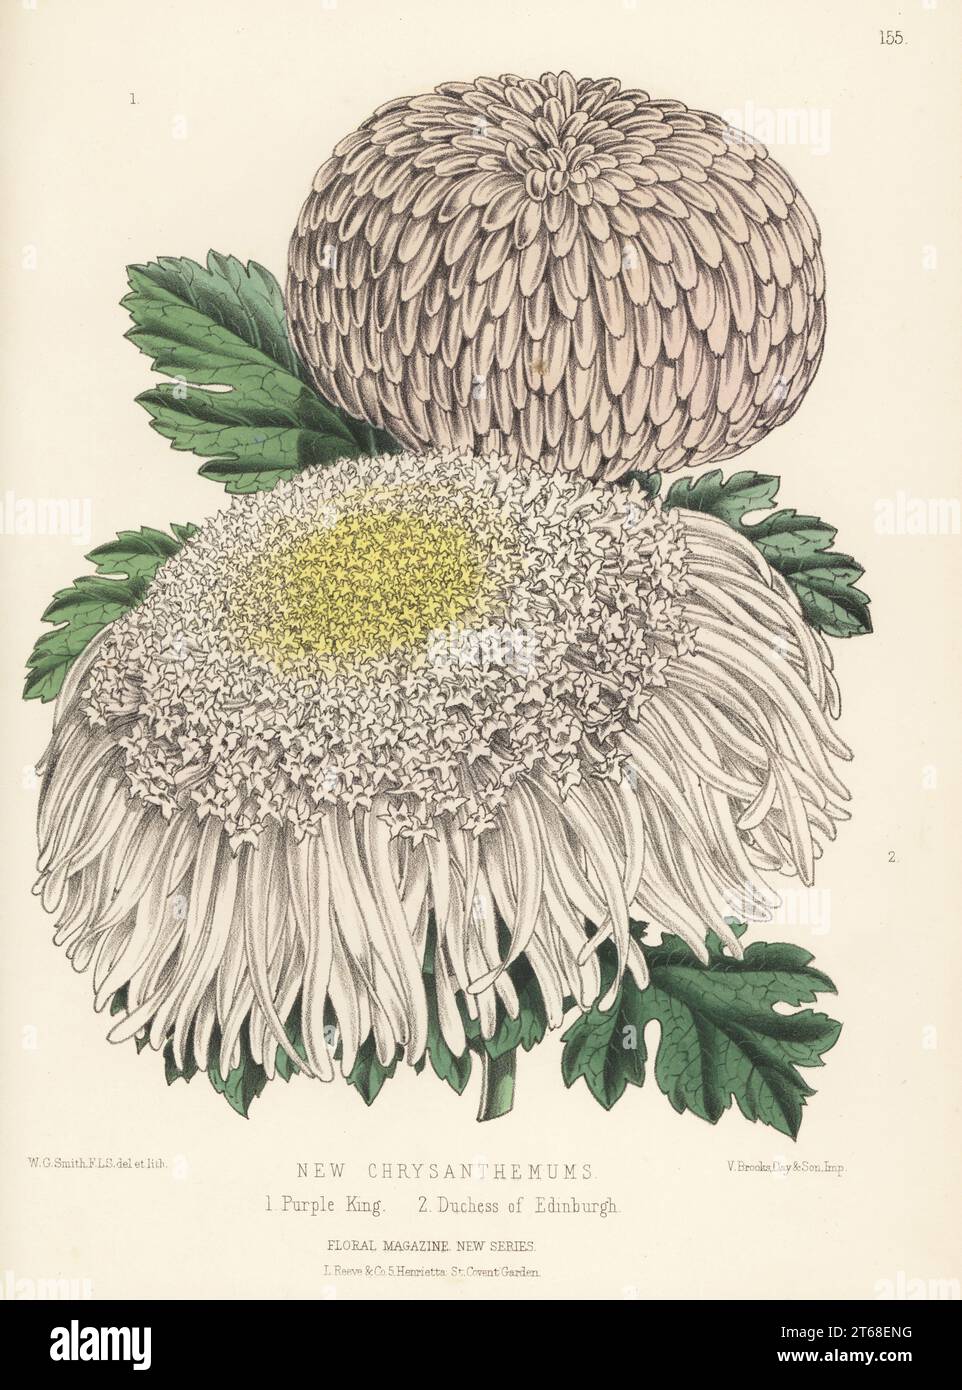 New Japanese chrysanthemum cultivars: Purple King 1 and Duchess of Edinburgh 2. Raised by James Herbert Veitch and Sons of Chelsea. Handcolored botanical illustration drawn and lithographed by Worthington George Smith from Henry Honywood Dombrain's Floral Magazine, New Series, Volume 4, L. Reeve, London, 1875. Lithograph printed by Vincent Brooks, Day & Son. Stock Photo